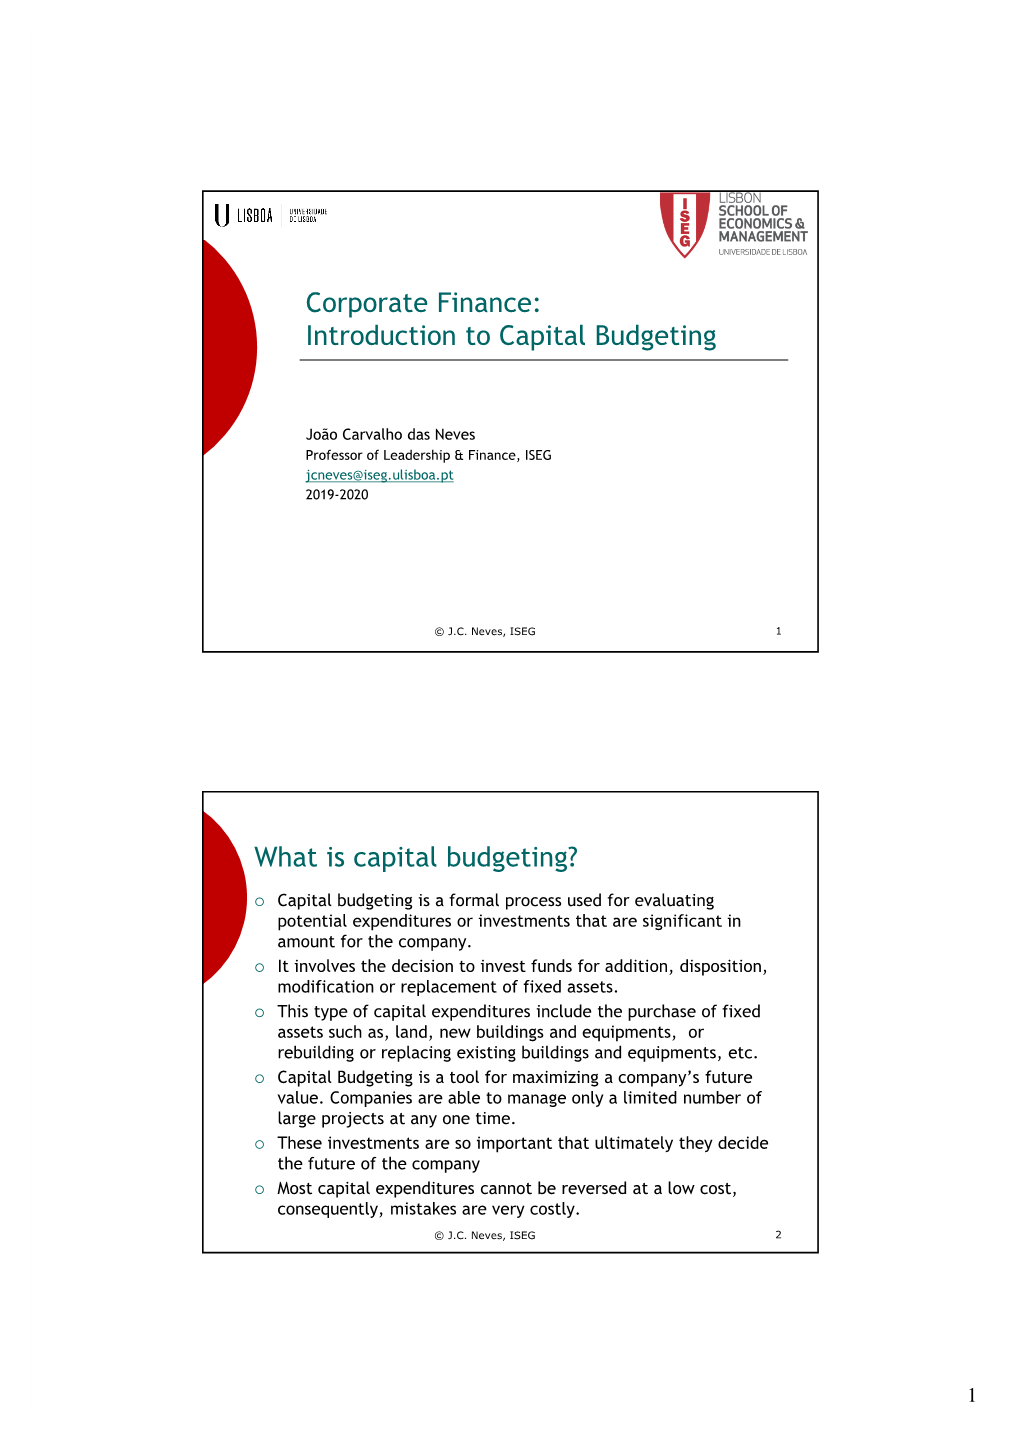 Corporate Finance: Introduction to Capital Budgeting What Is Capital